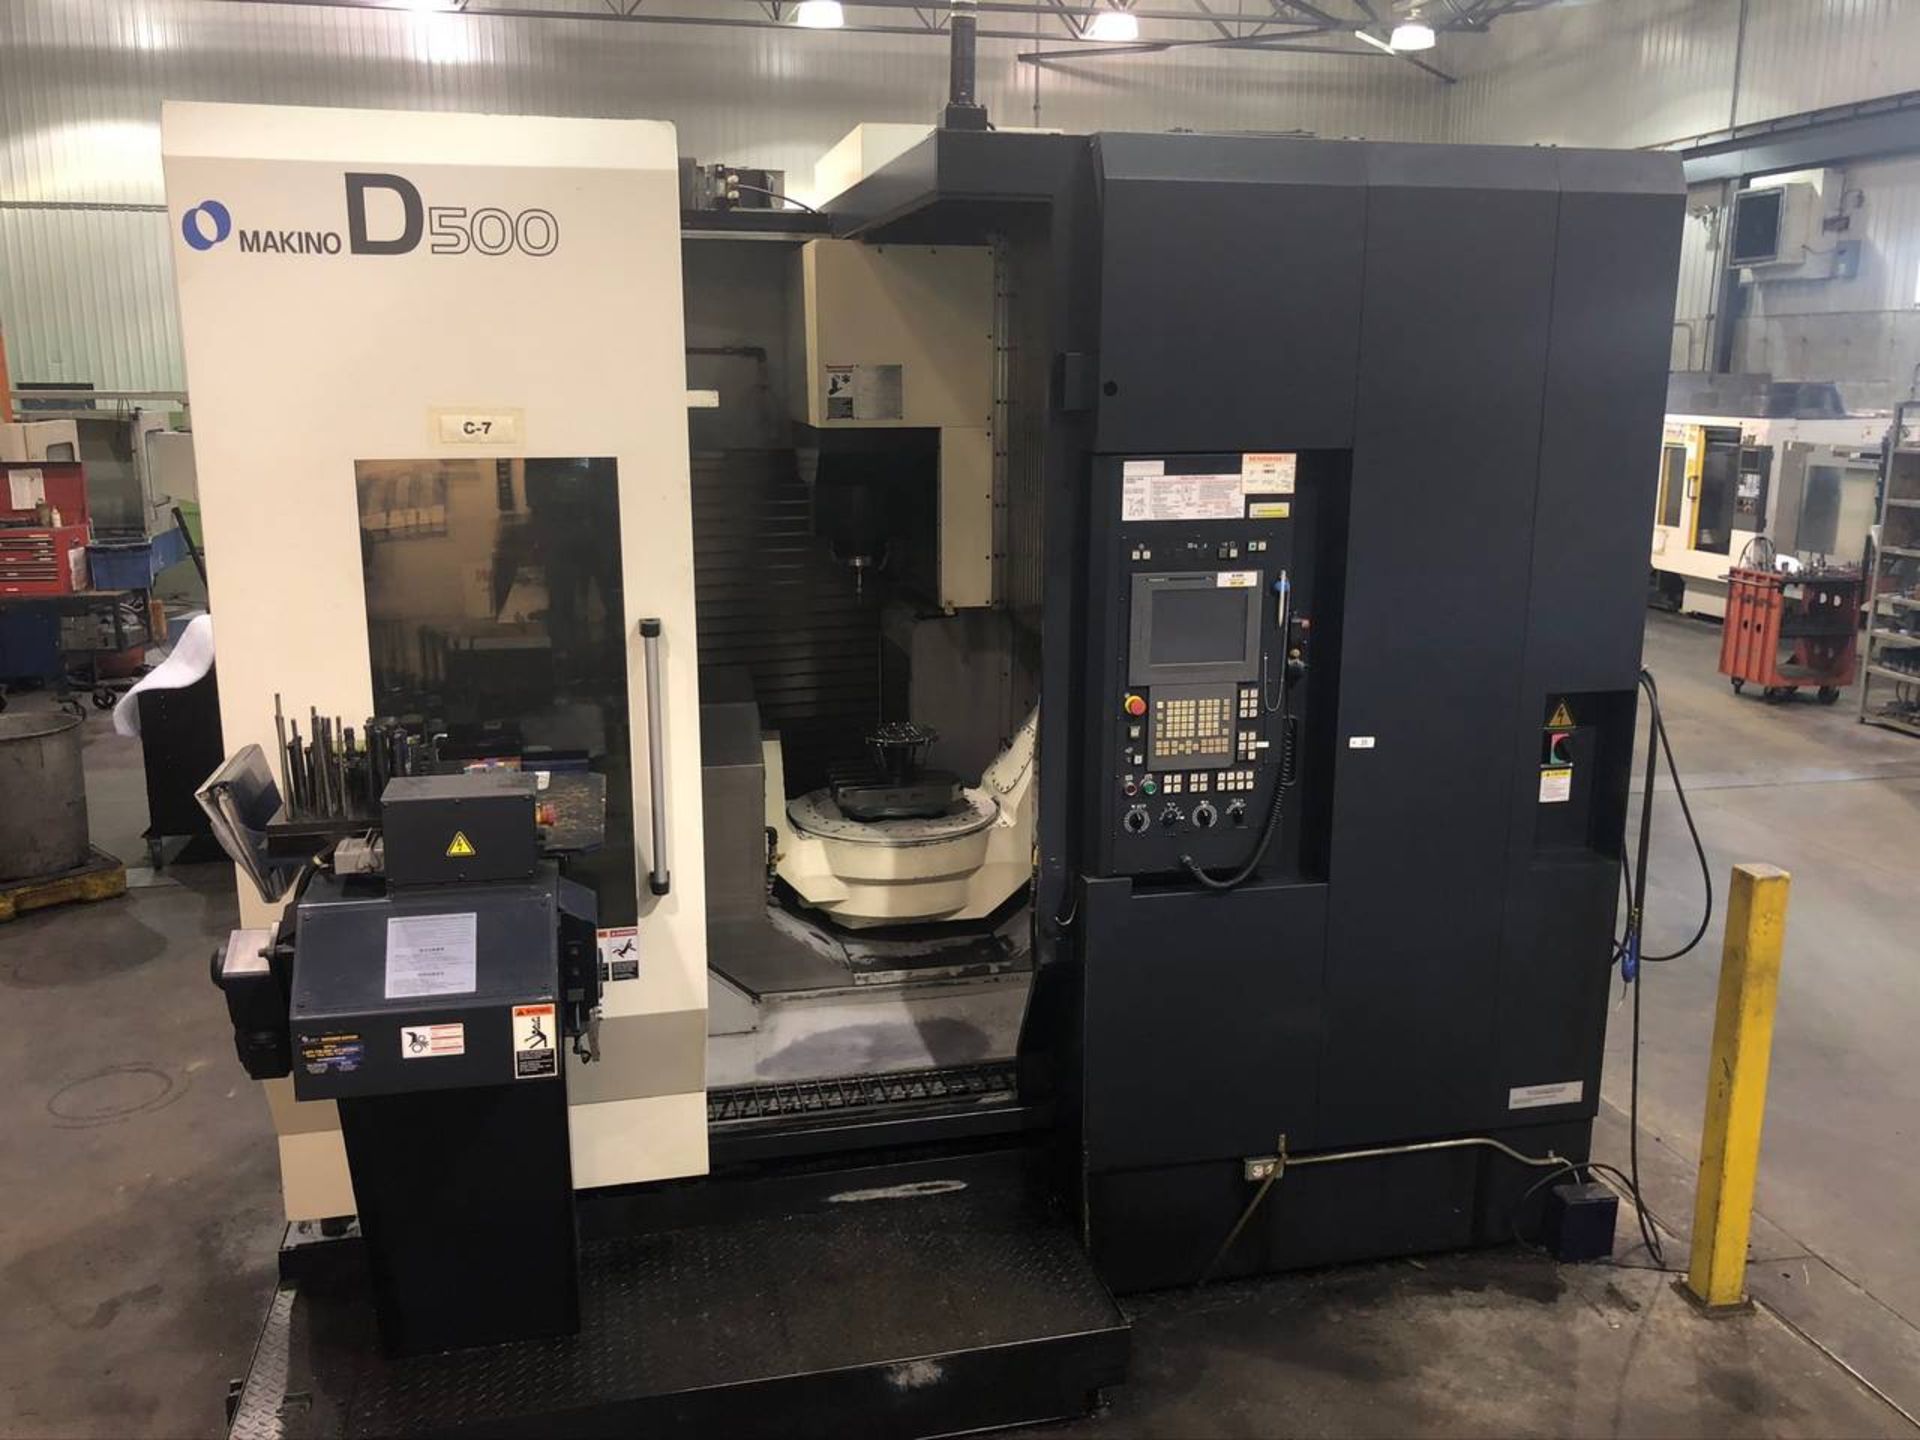 2012 Makino D500 5 Axis CNC Vertical Maching Center, - Image 2 of 7